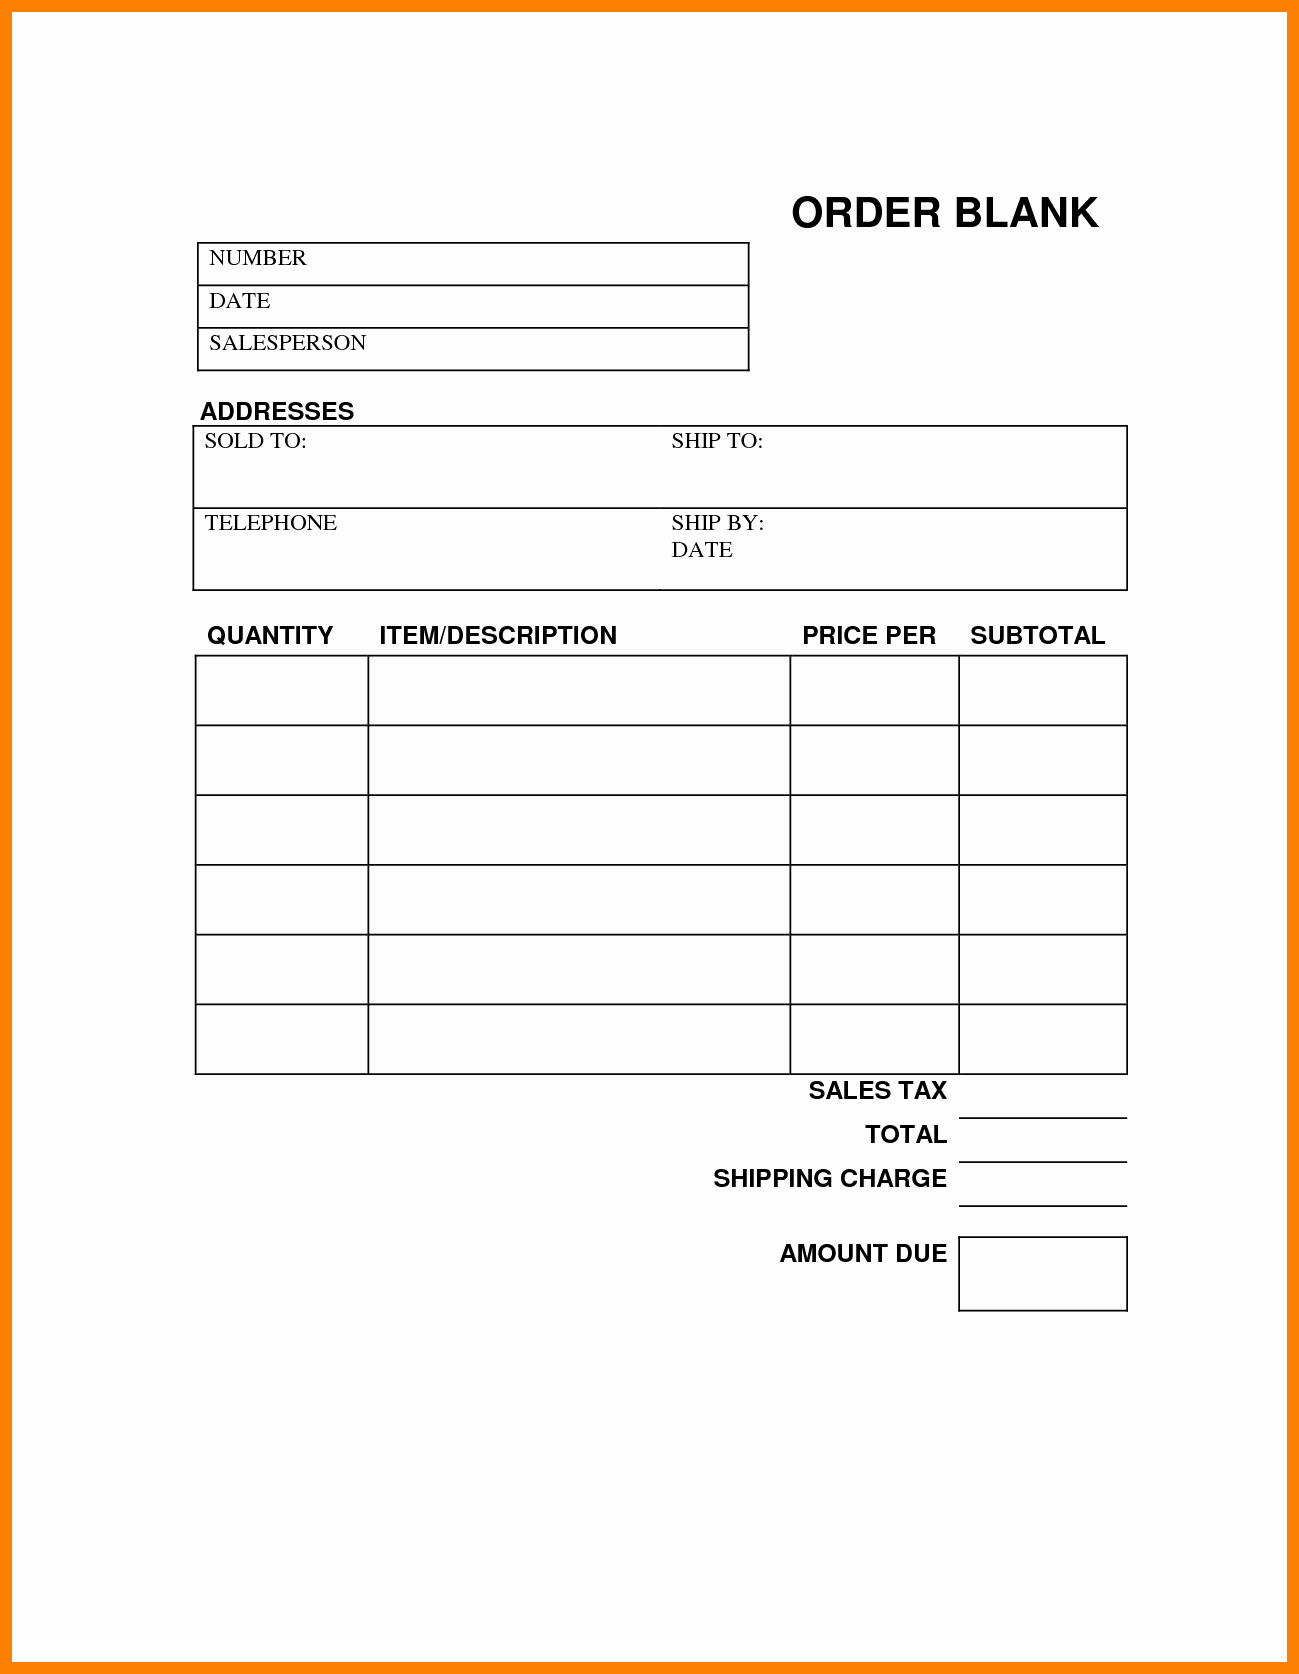 Blank order form Template Word Inspirational Printable order form Template Blank order form Template